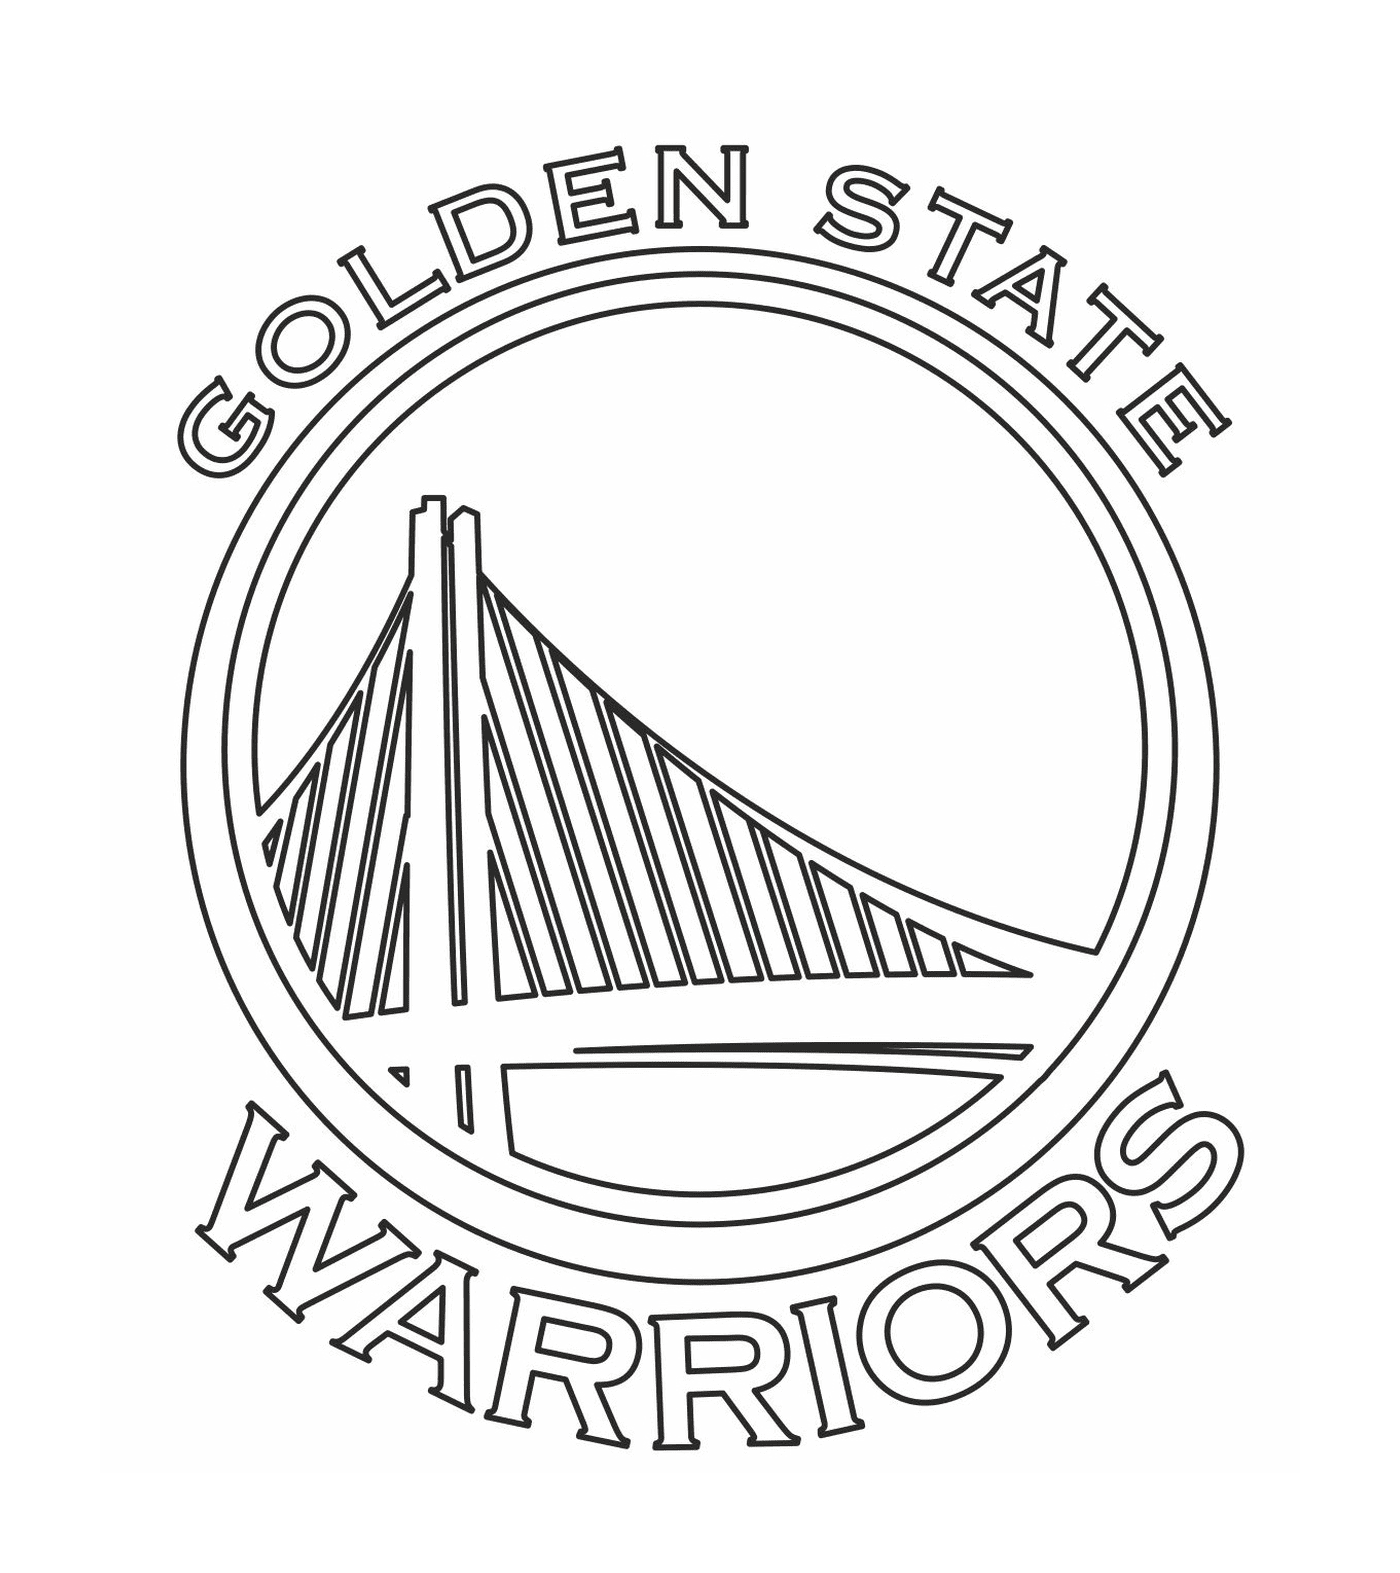  The logo of the NBA Golden State Warriors 